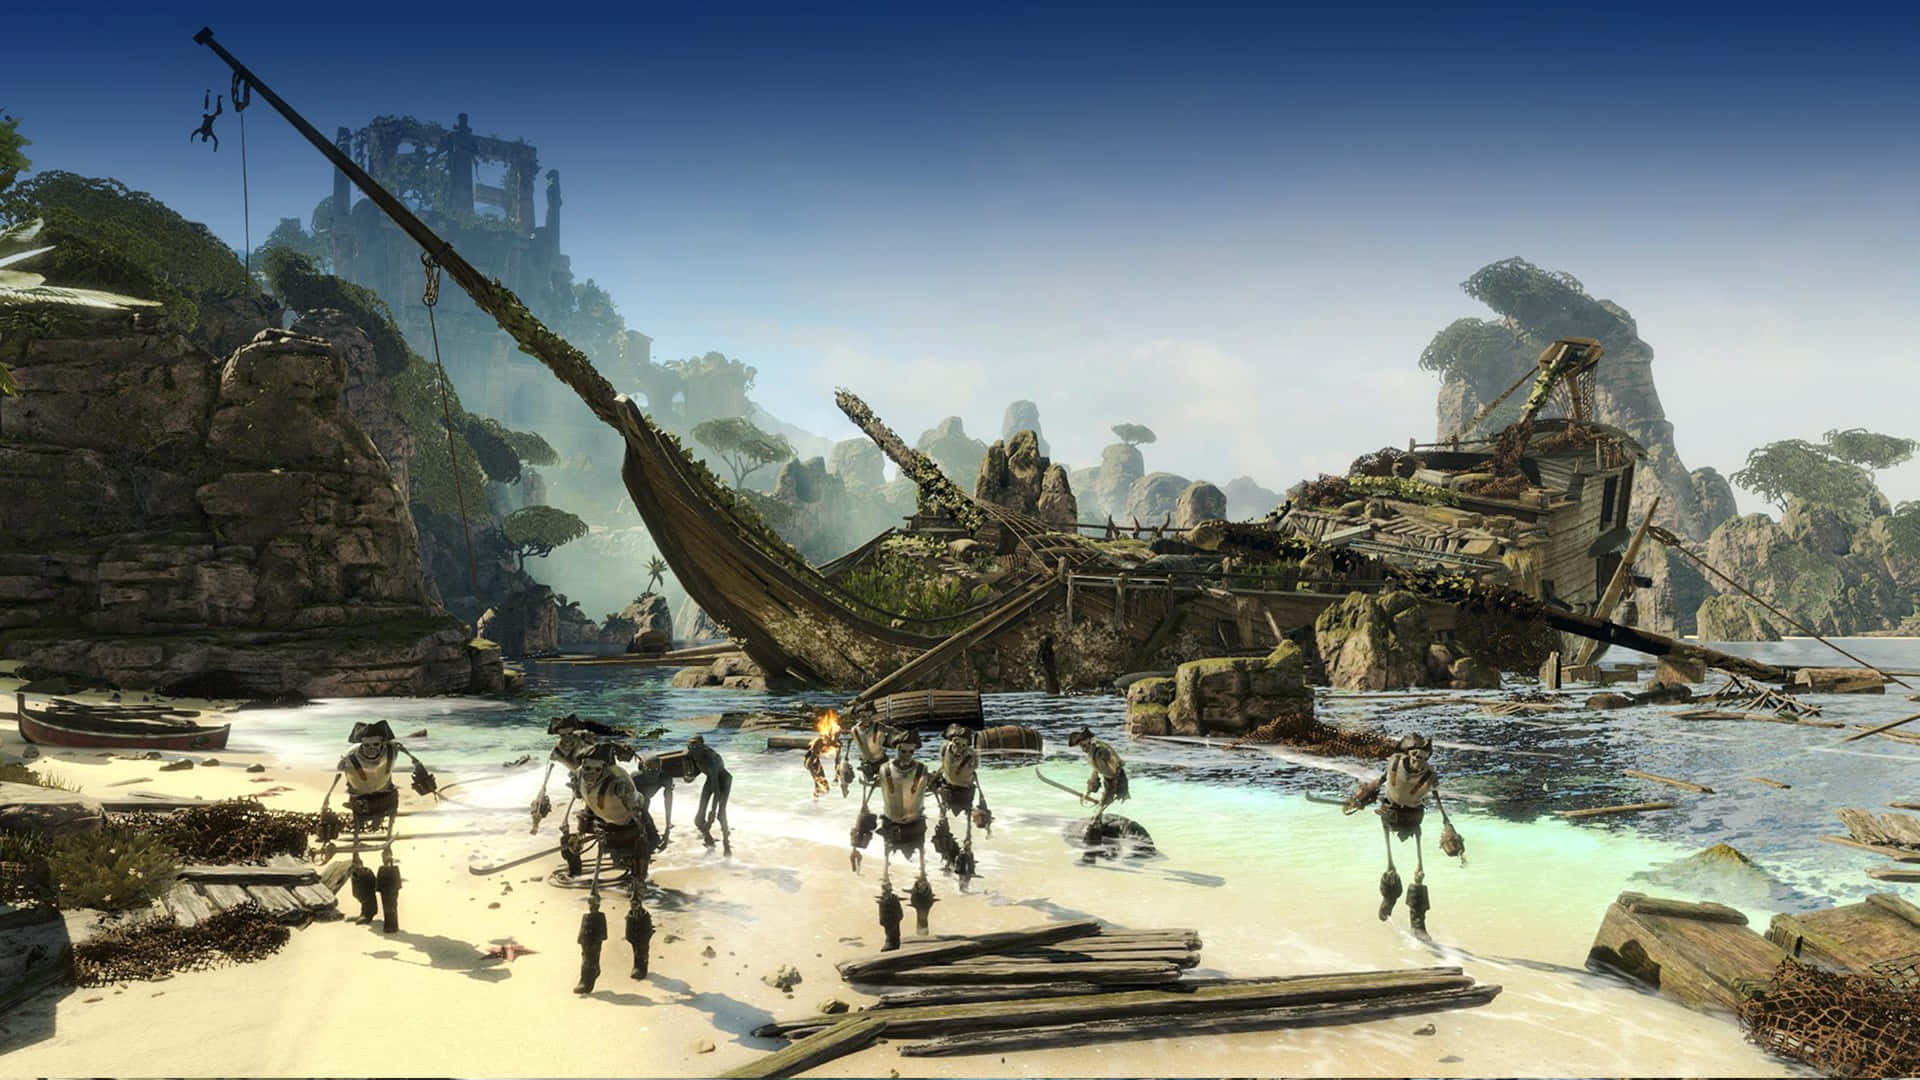 A Screenshot Of A Scene With A Ship And People On The Beach